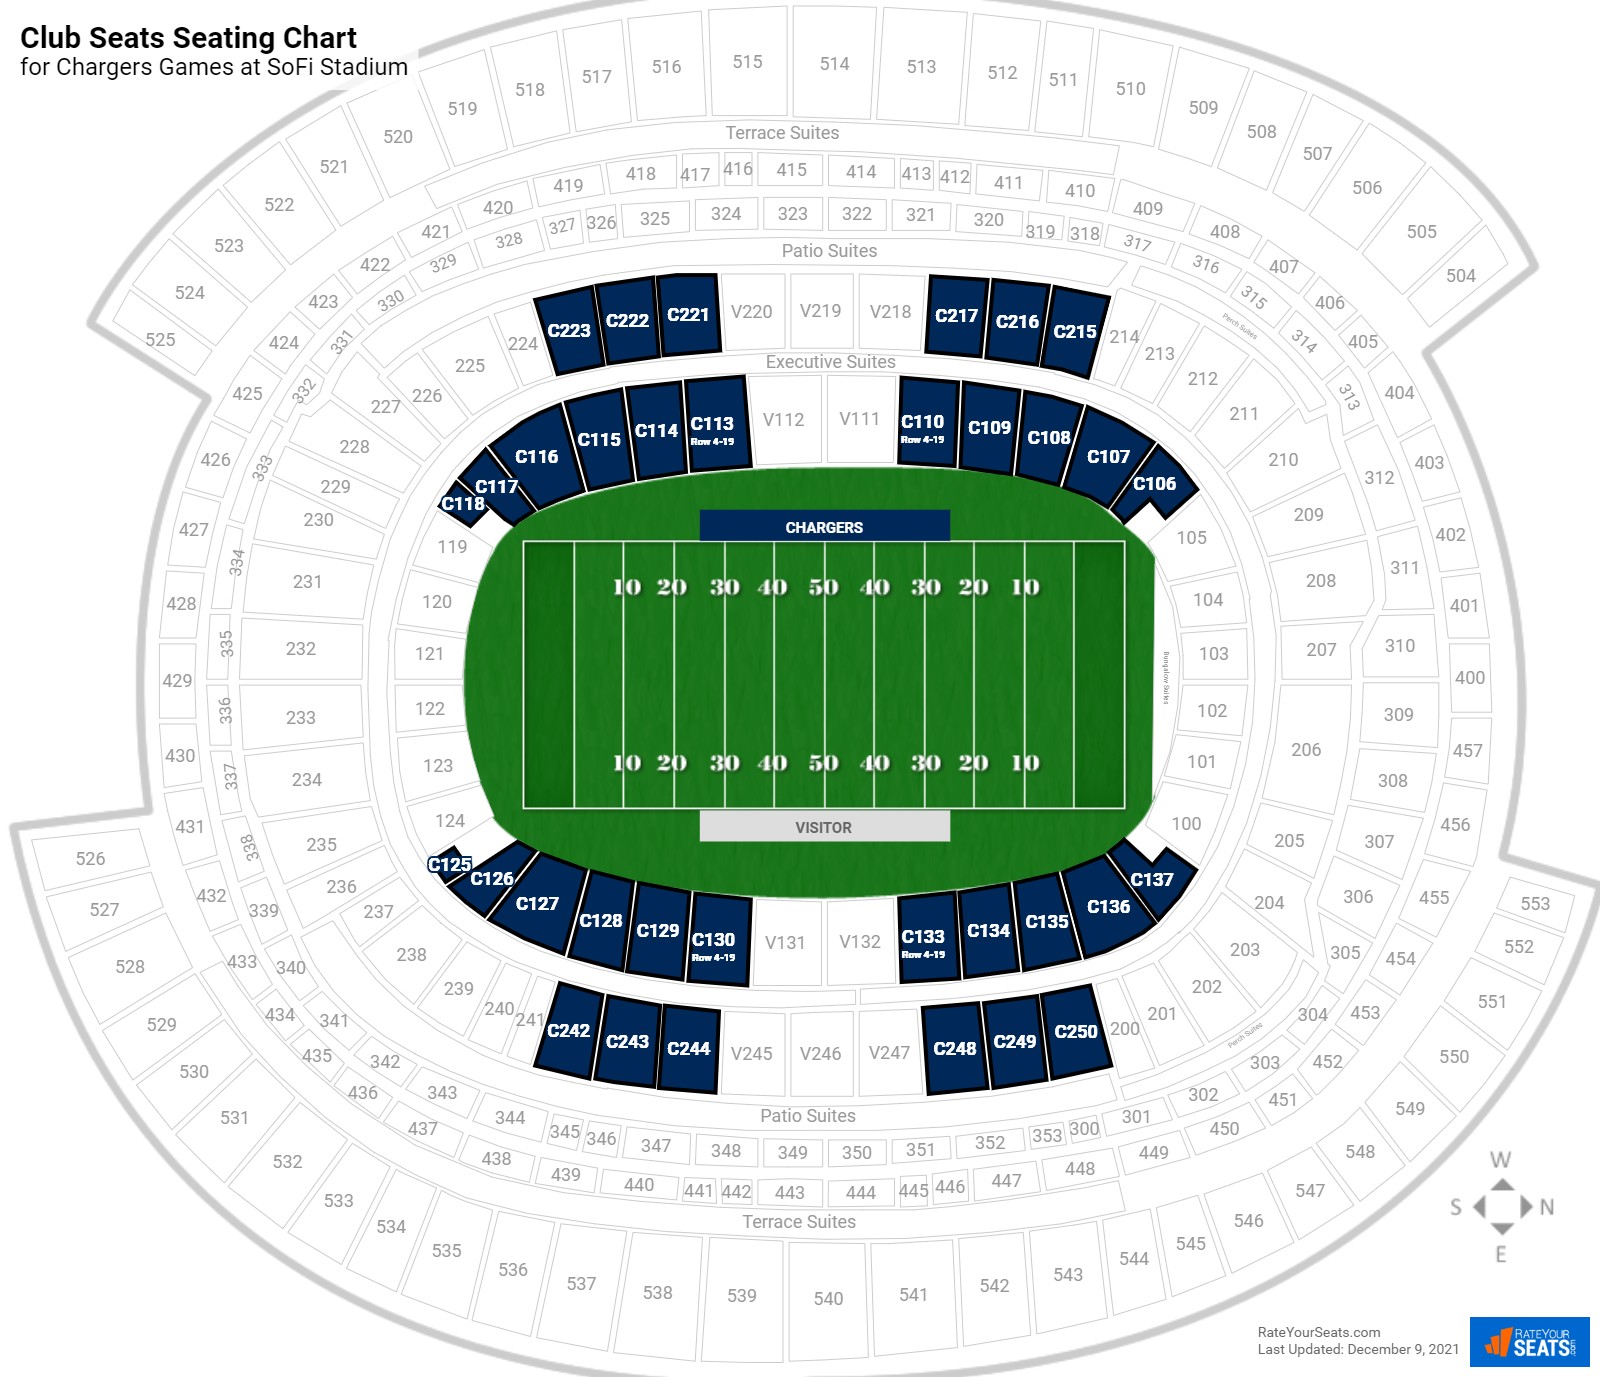 Share 108+ imagen sofi stadium seating chart with seat numbers - In ...